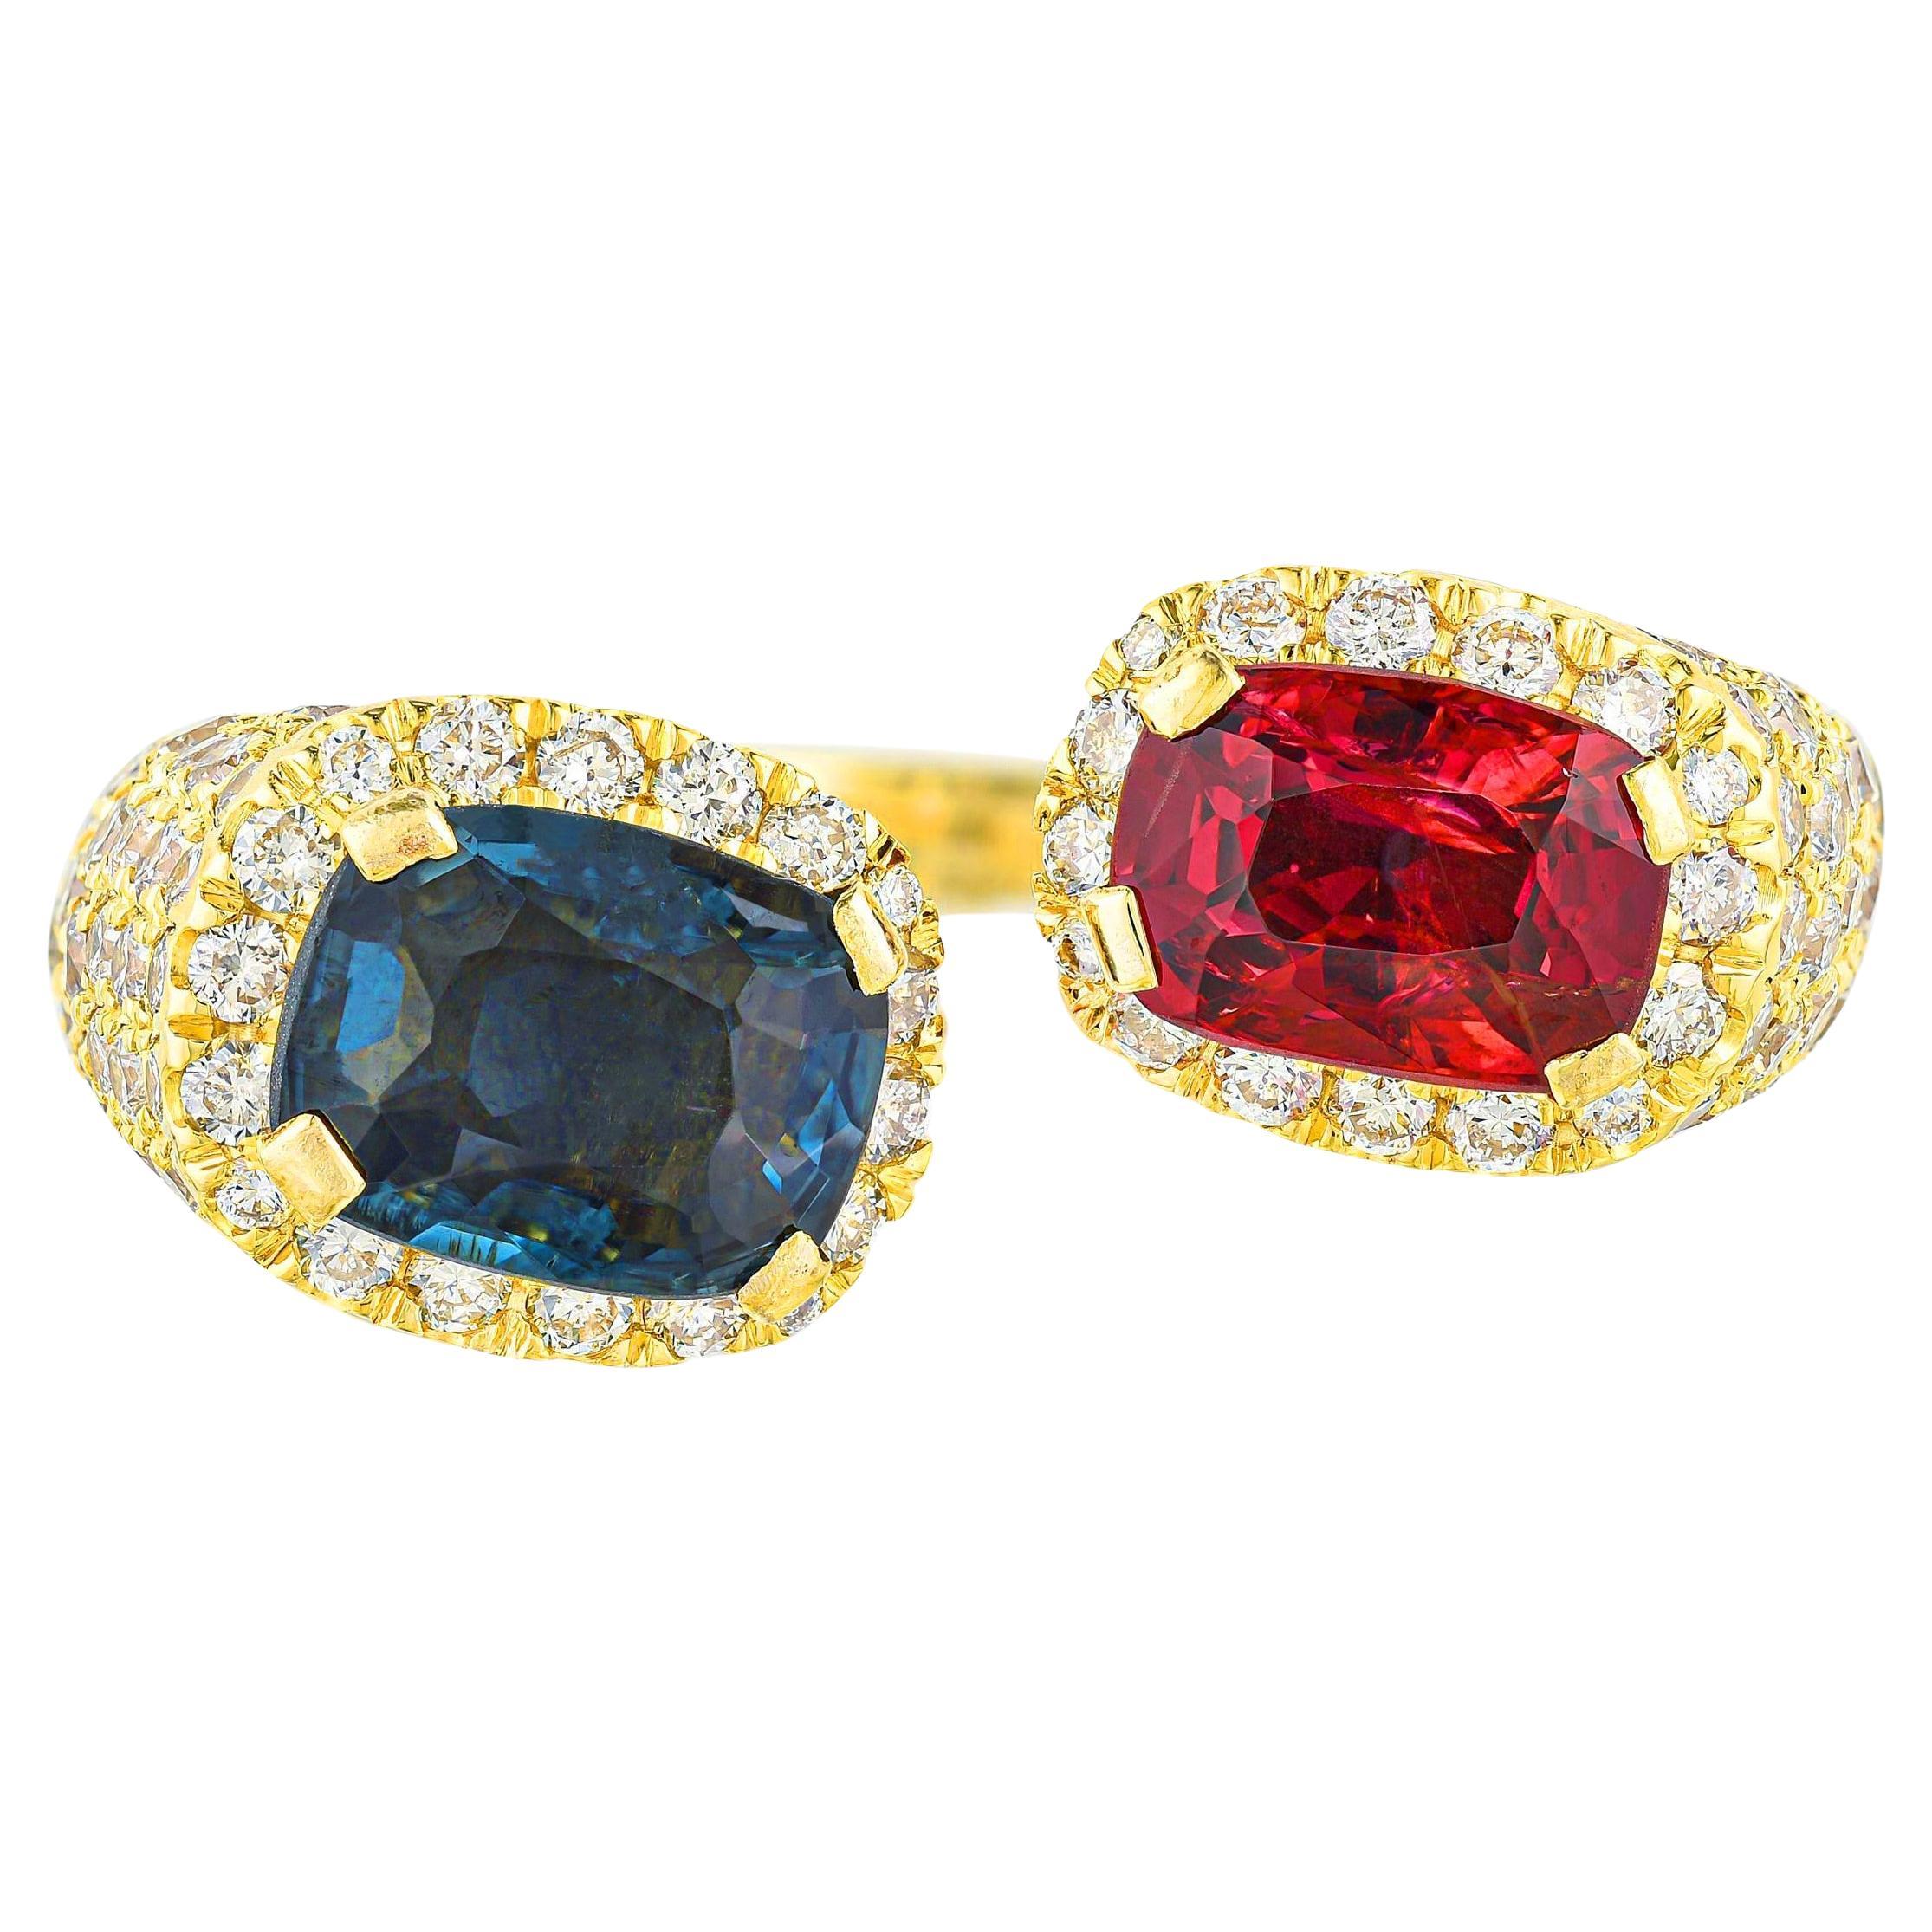 Rare Natural Blue and Red Spinel Bypass Ring Diamond Setting 4 Carats 18K Gold For Sale